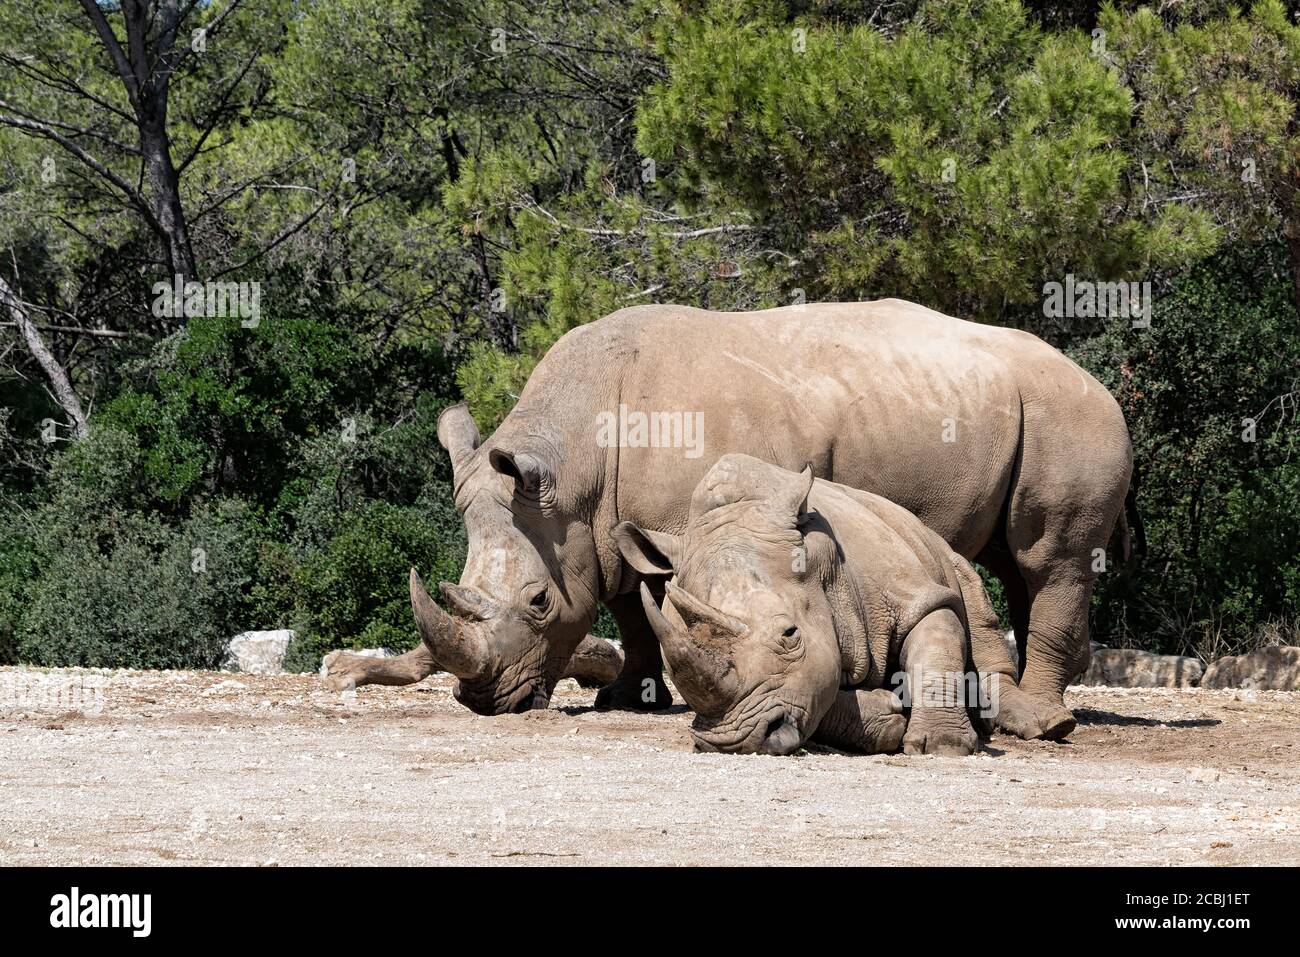 A Southern White Rhino stands behind it's napping mate in the bright sun. Stock Photo